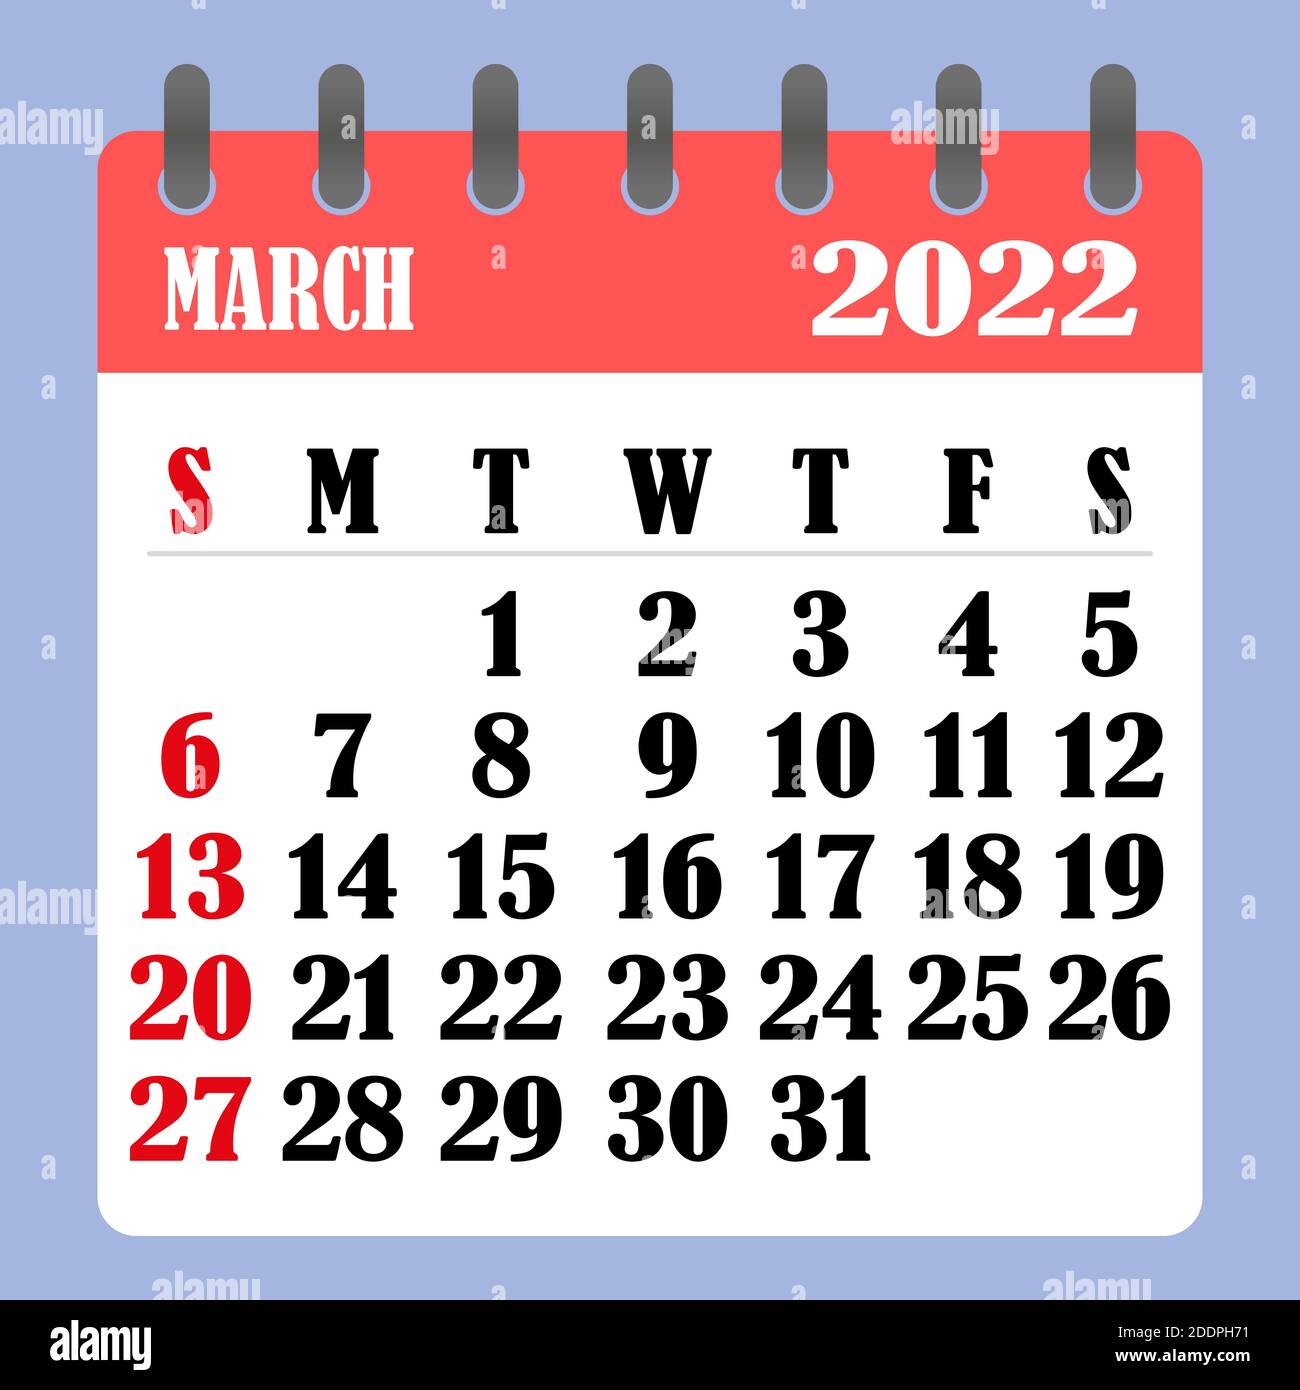 MARCH 2022